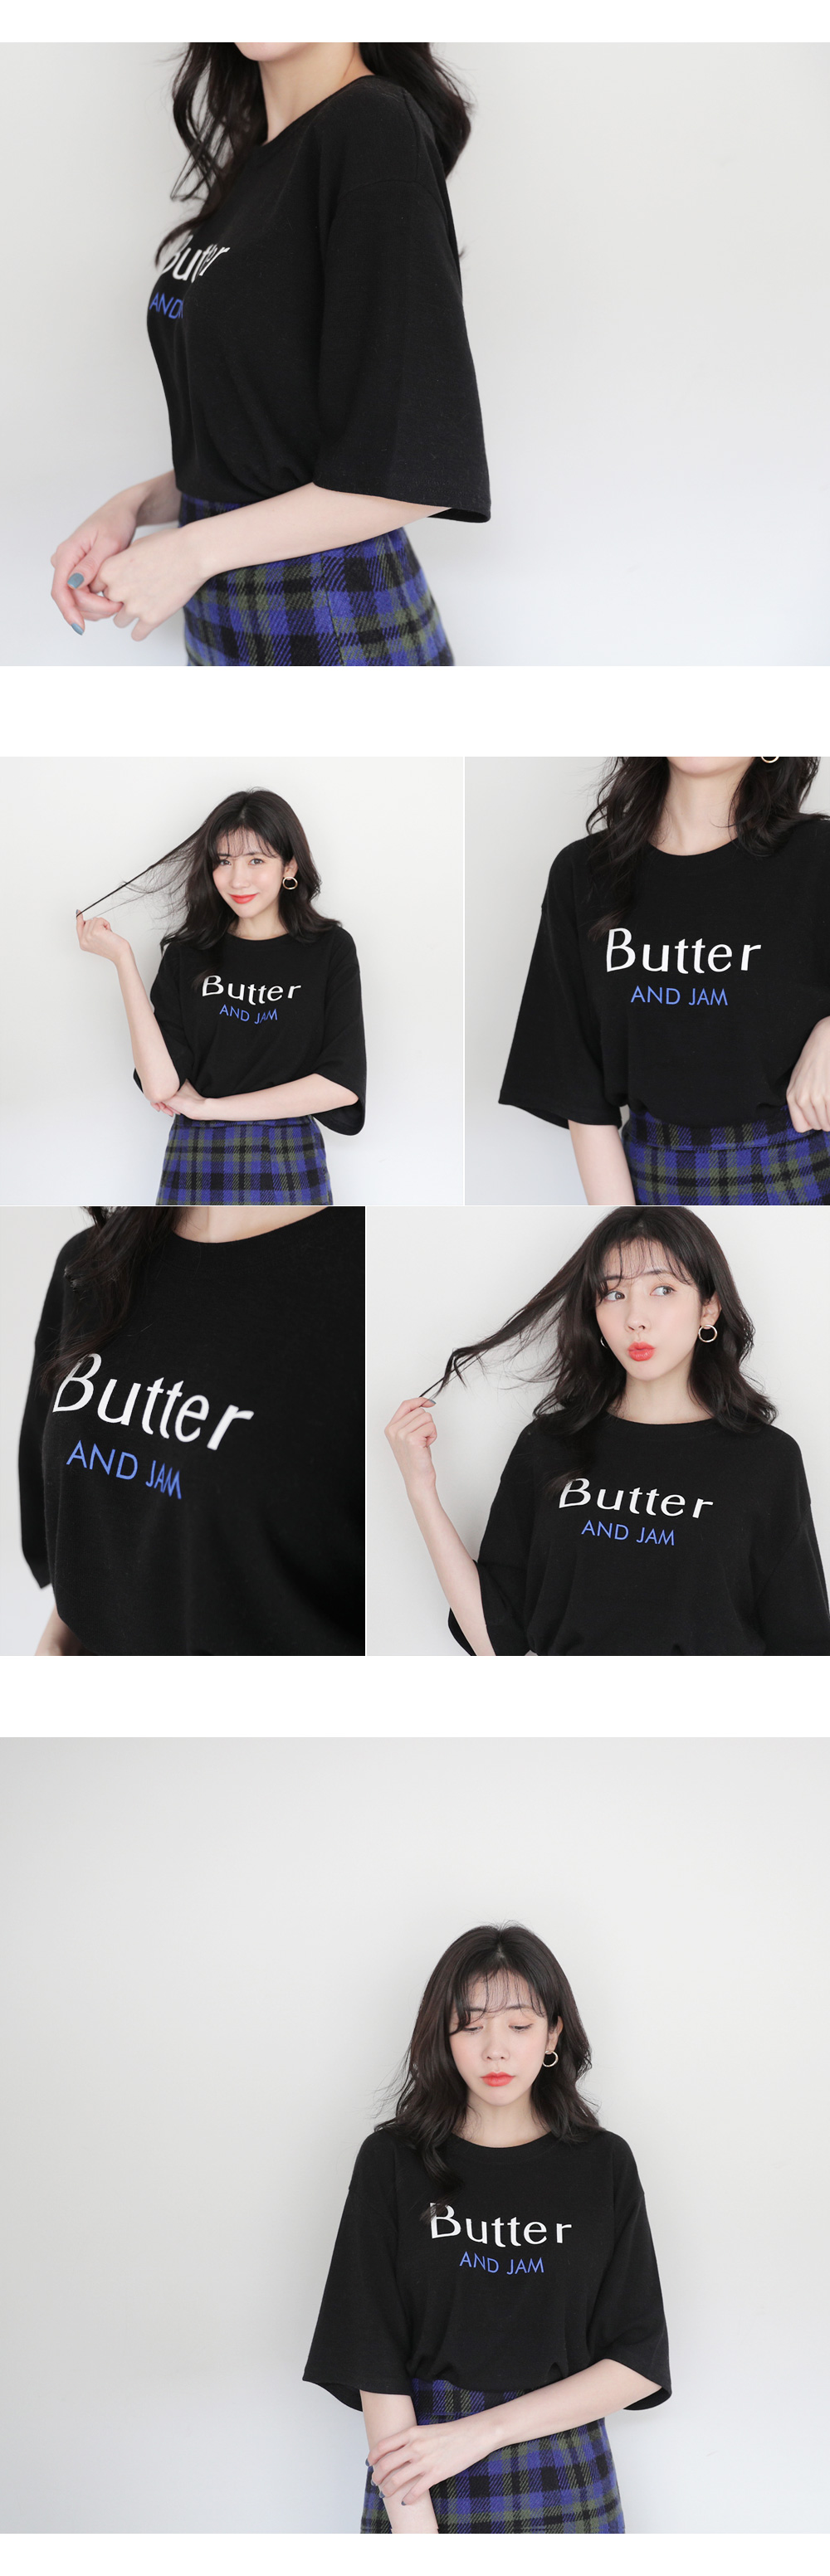 Butter AND JAMルーズTシャツ・全2色 | DHOLIC | 詳細画像5